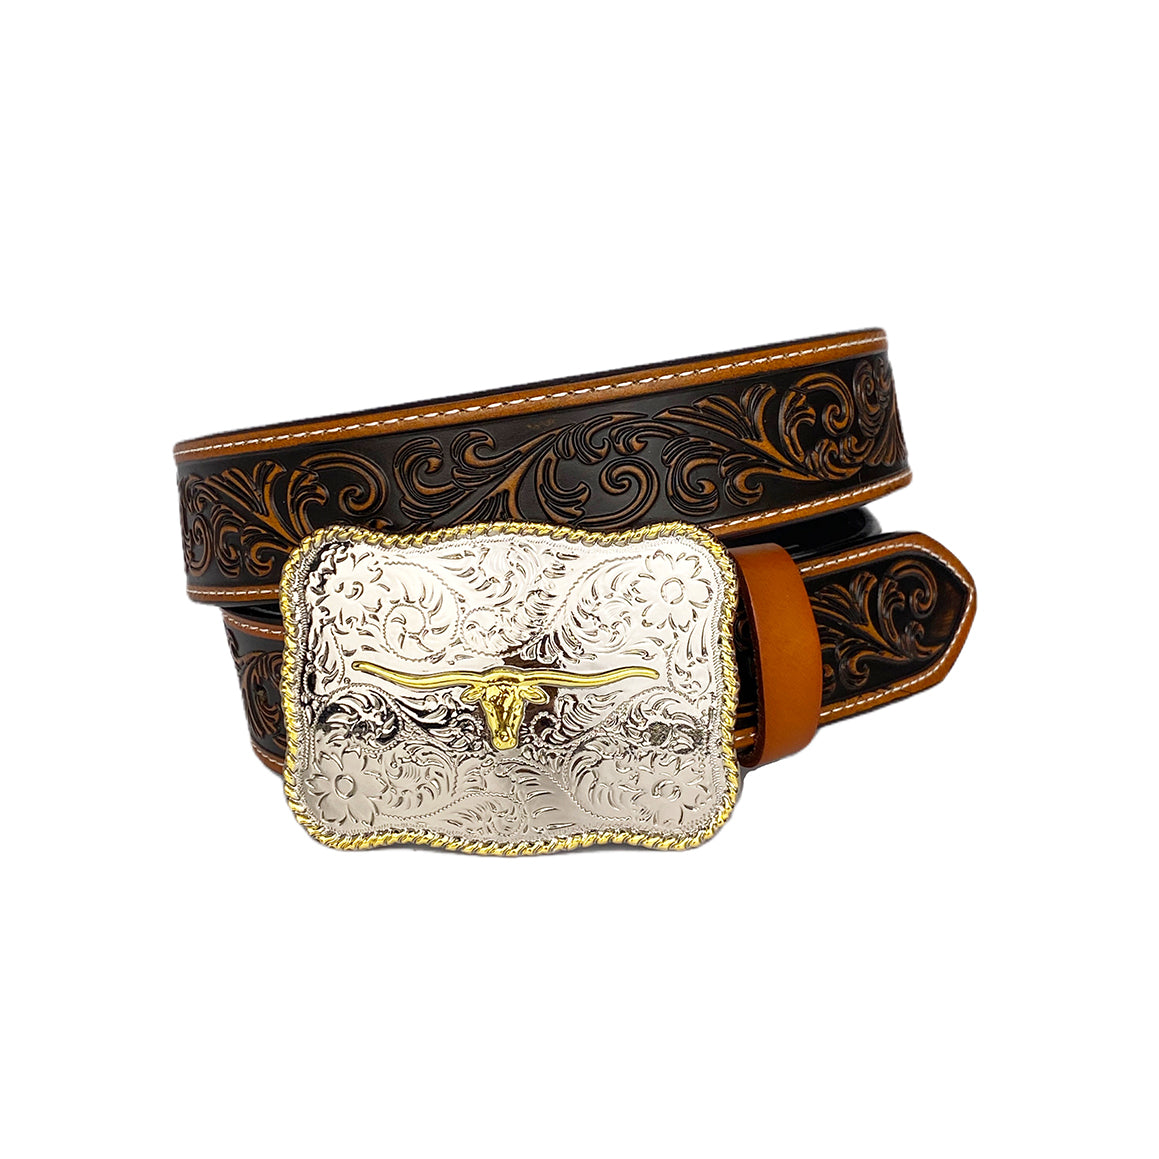 TOPACC Western Genuine Leather Pattern Tooled Belt- Rectangle Two Tone Longhorn Cow Belt Buckle